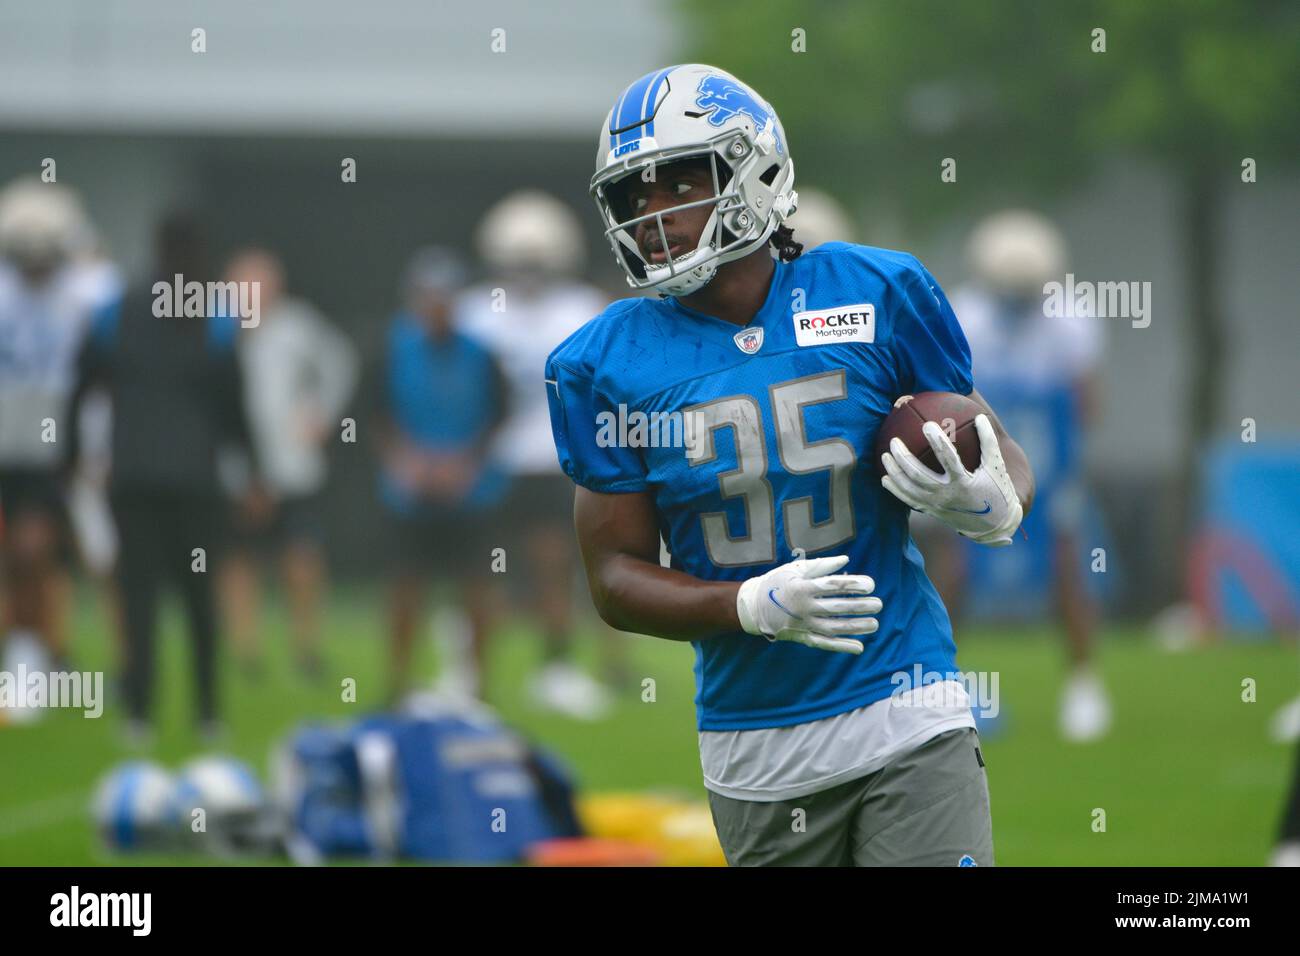 ALLEN PARK, MI - AUGUST 05: Detroit Lions RB Godwin Igwebuike (35) in action during Lions training camp on August 5, 2022 at Detroit Lions Training Camp in Allen Park, MI (Photo by Allan Dranberg/CSM) Stock Photo